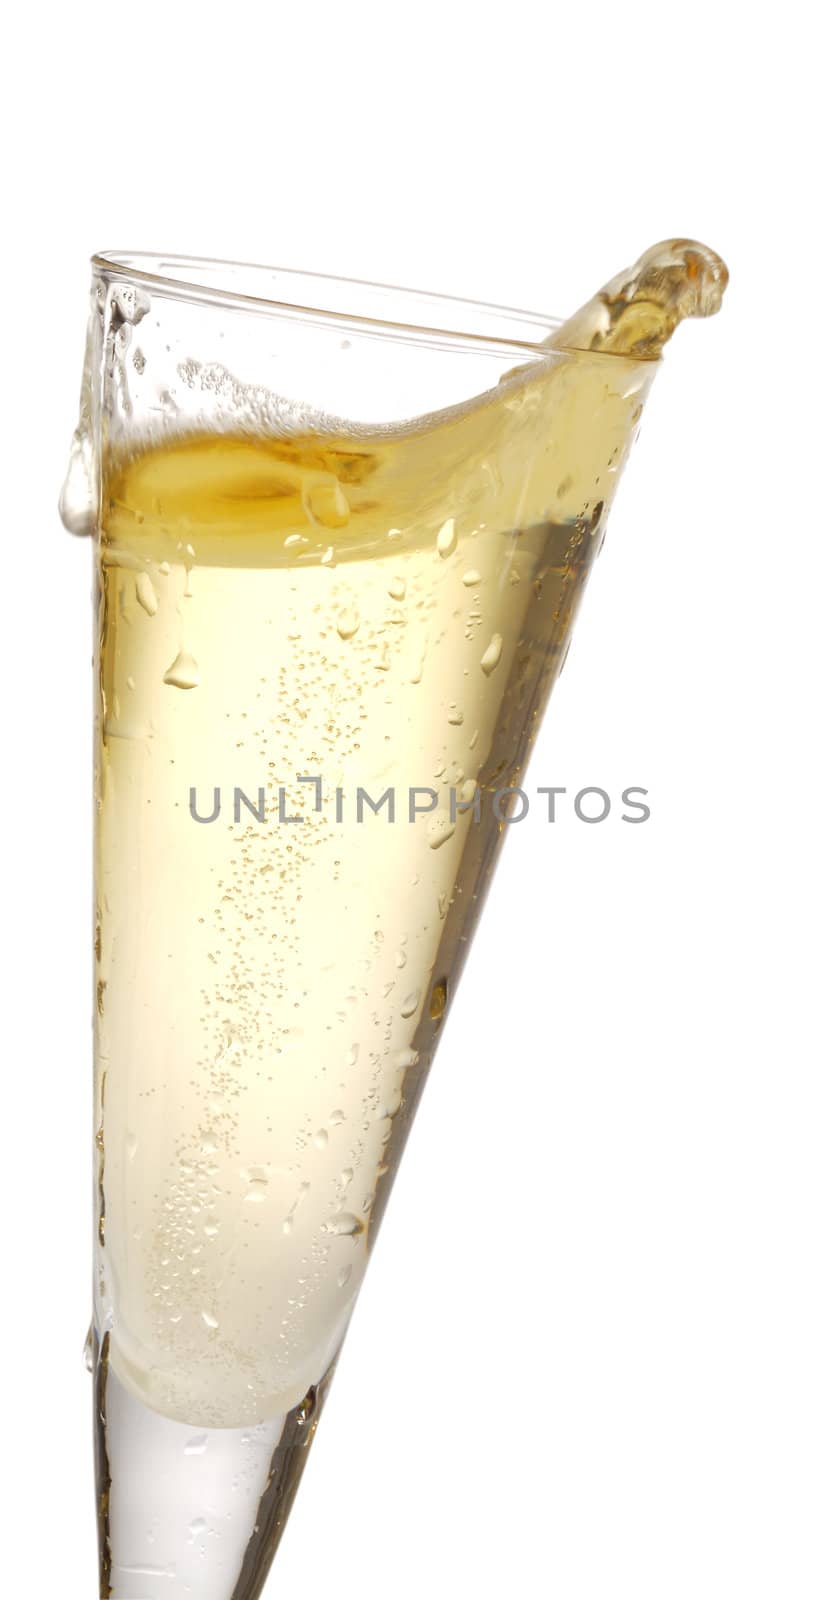 one champagne glass with champagne splashing out of it